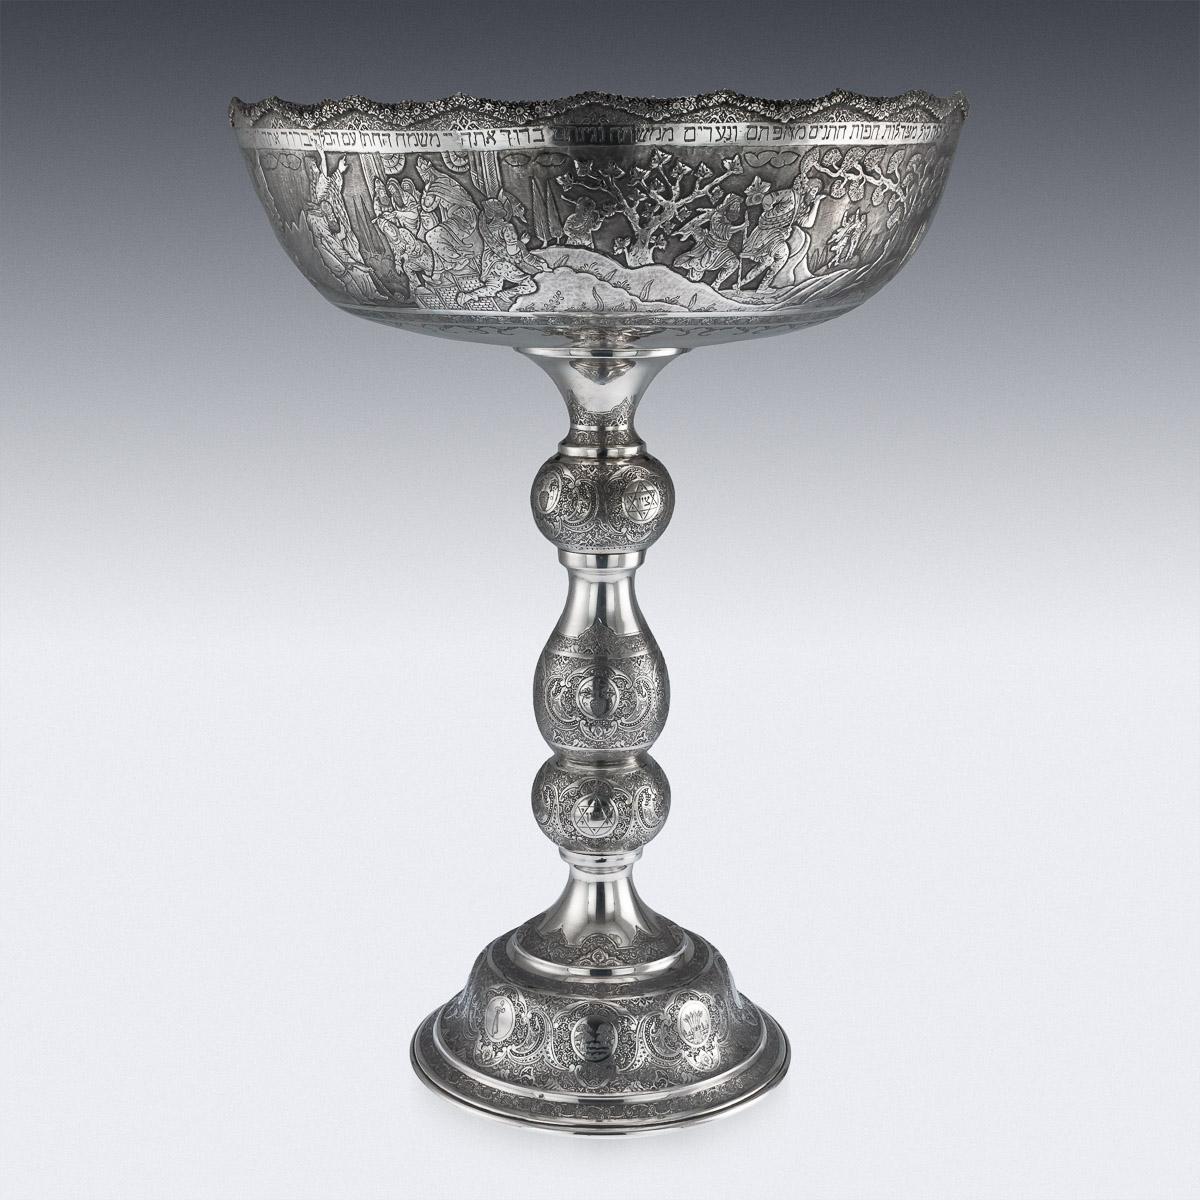 Antique 20th century Persian Jewish monumental solid silver centrepiece tazza, of very large size, profusely decorated with Persian traditional scrolling design, originating from the city of Isfahan, applied cast wavy borders, the bowl depicting the